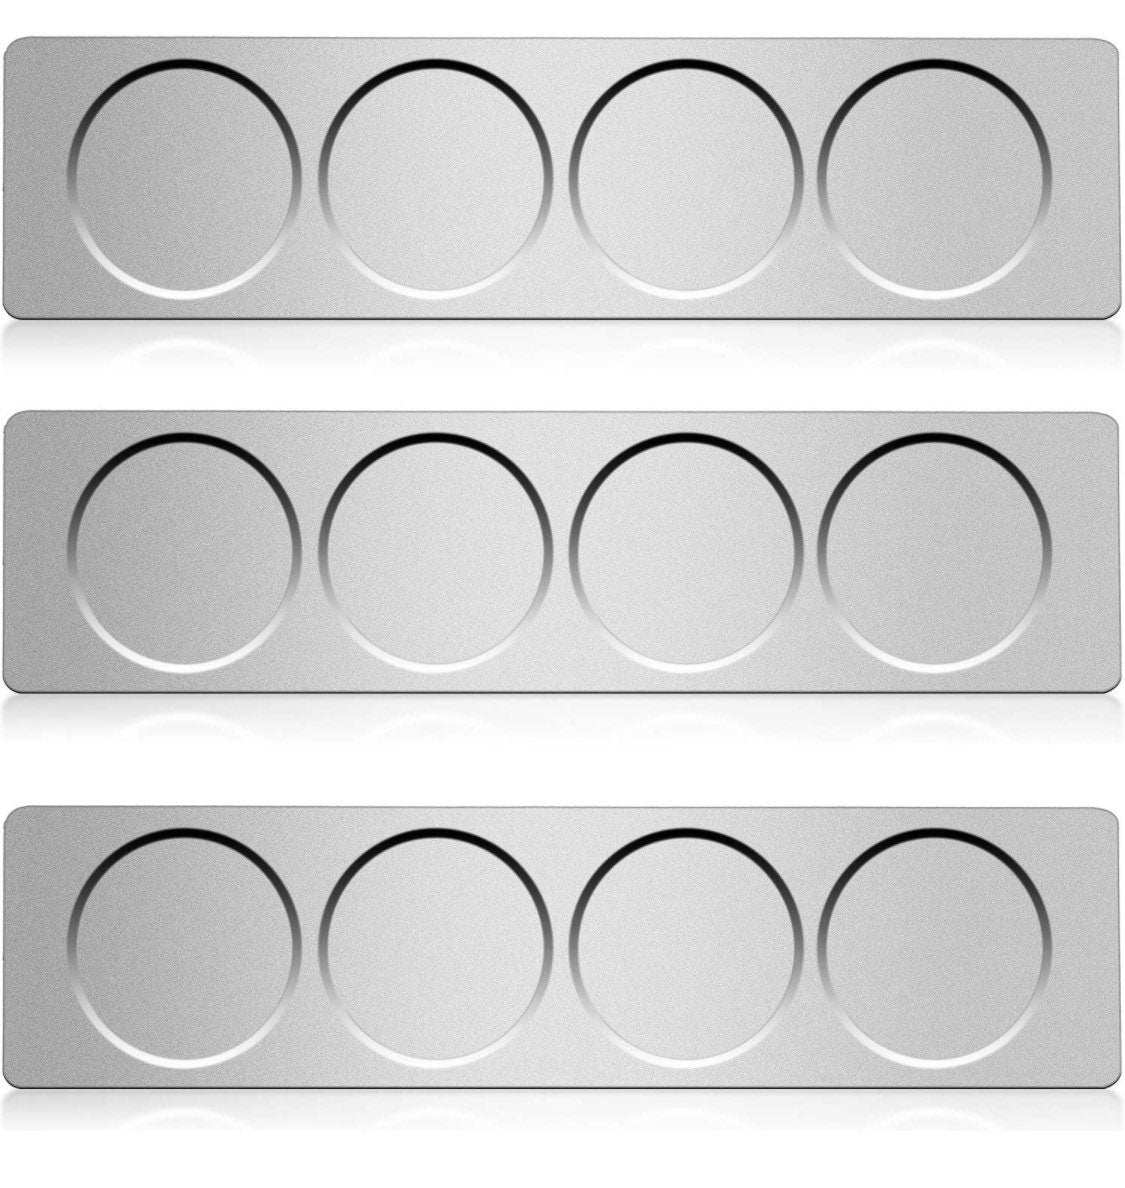 Magnetic Containers with Mountable Plate - Minimalist Storage - Spice containers - Craft Containers - 4ct with Plate